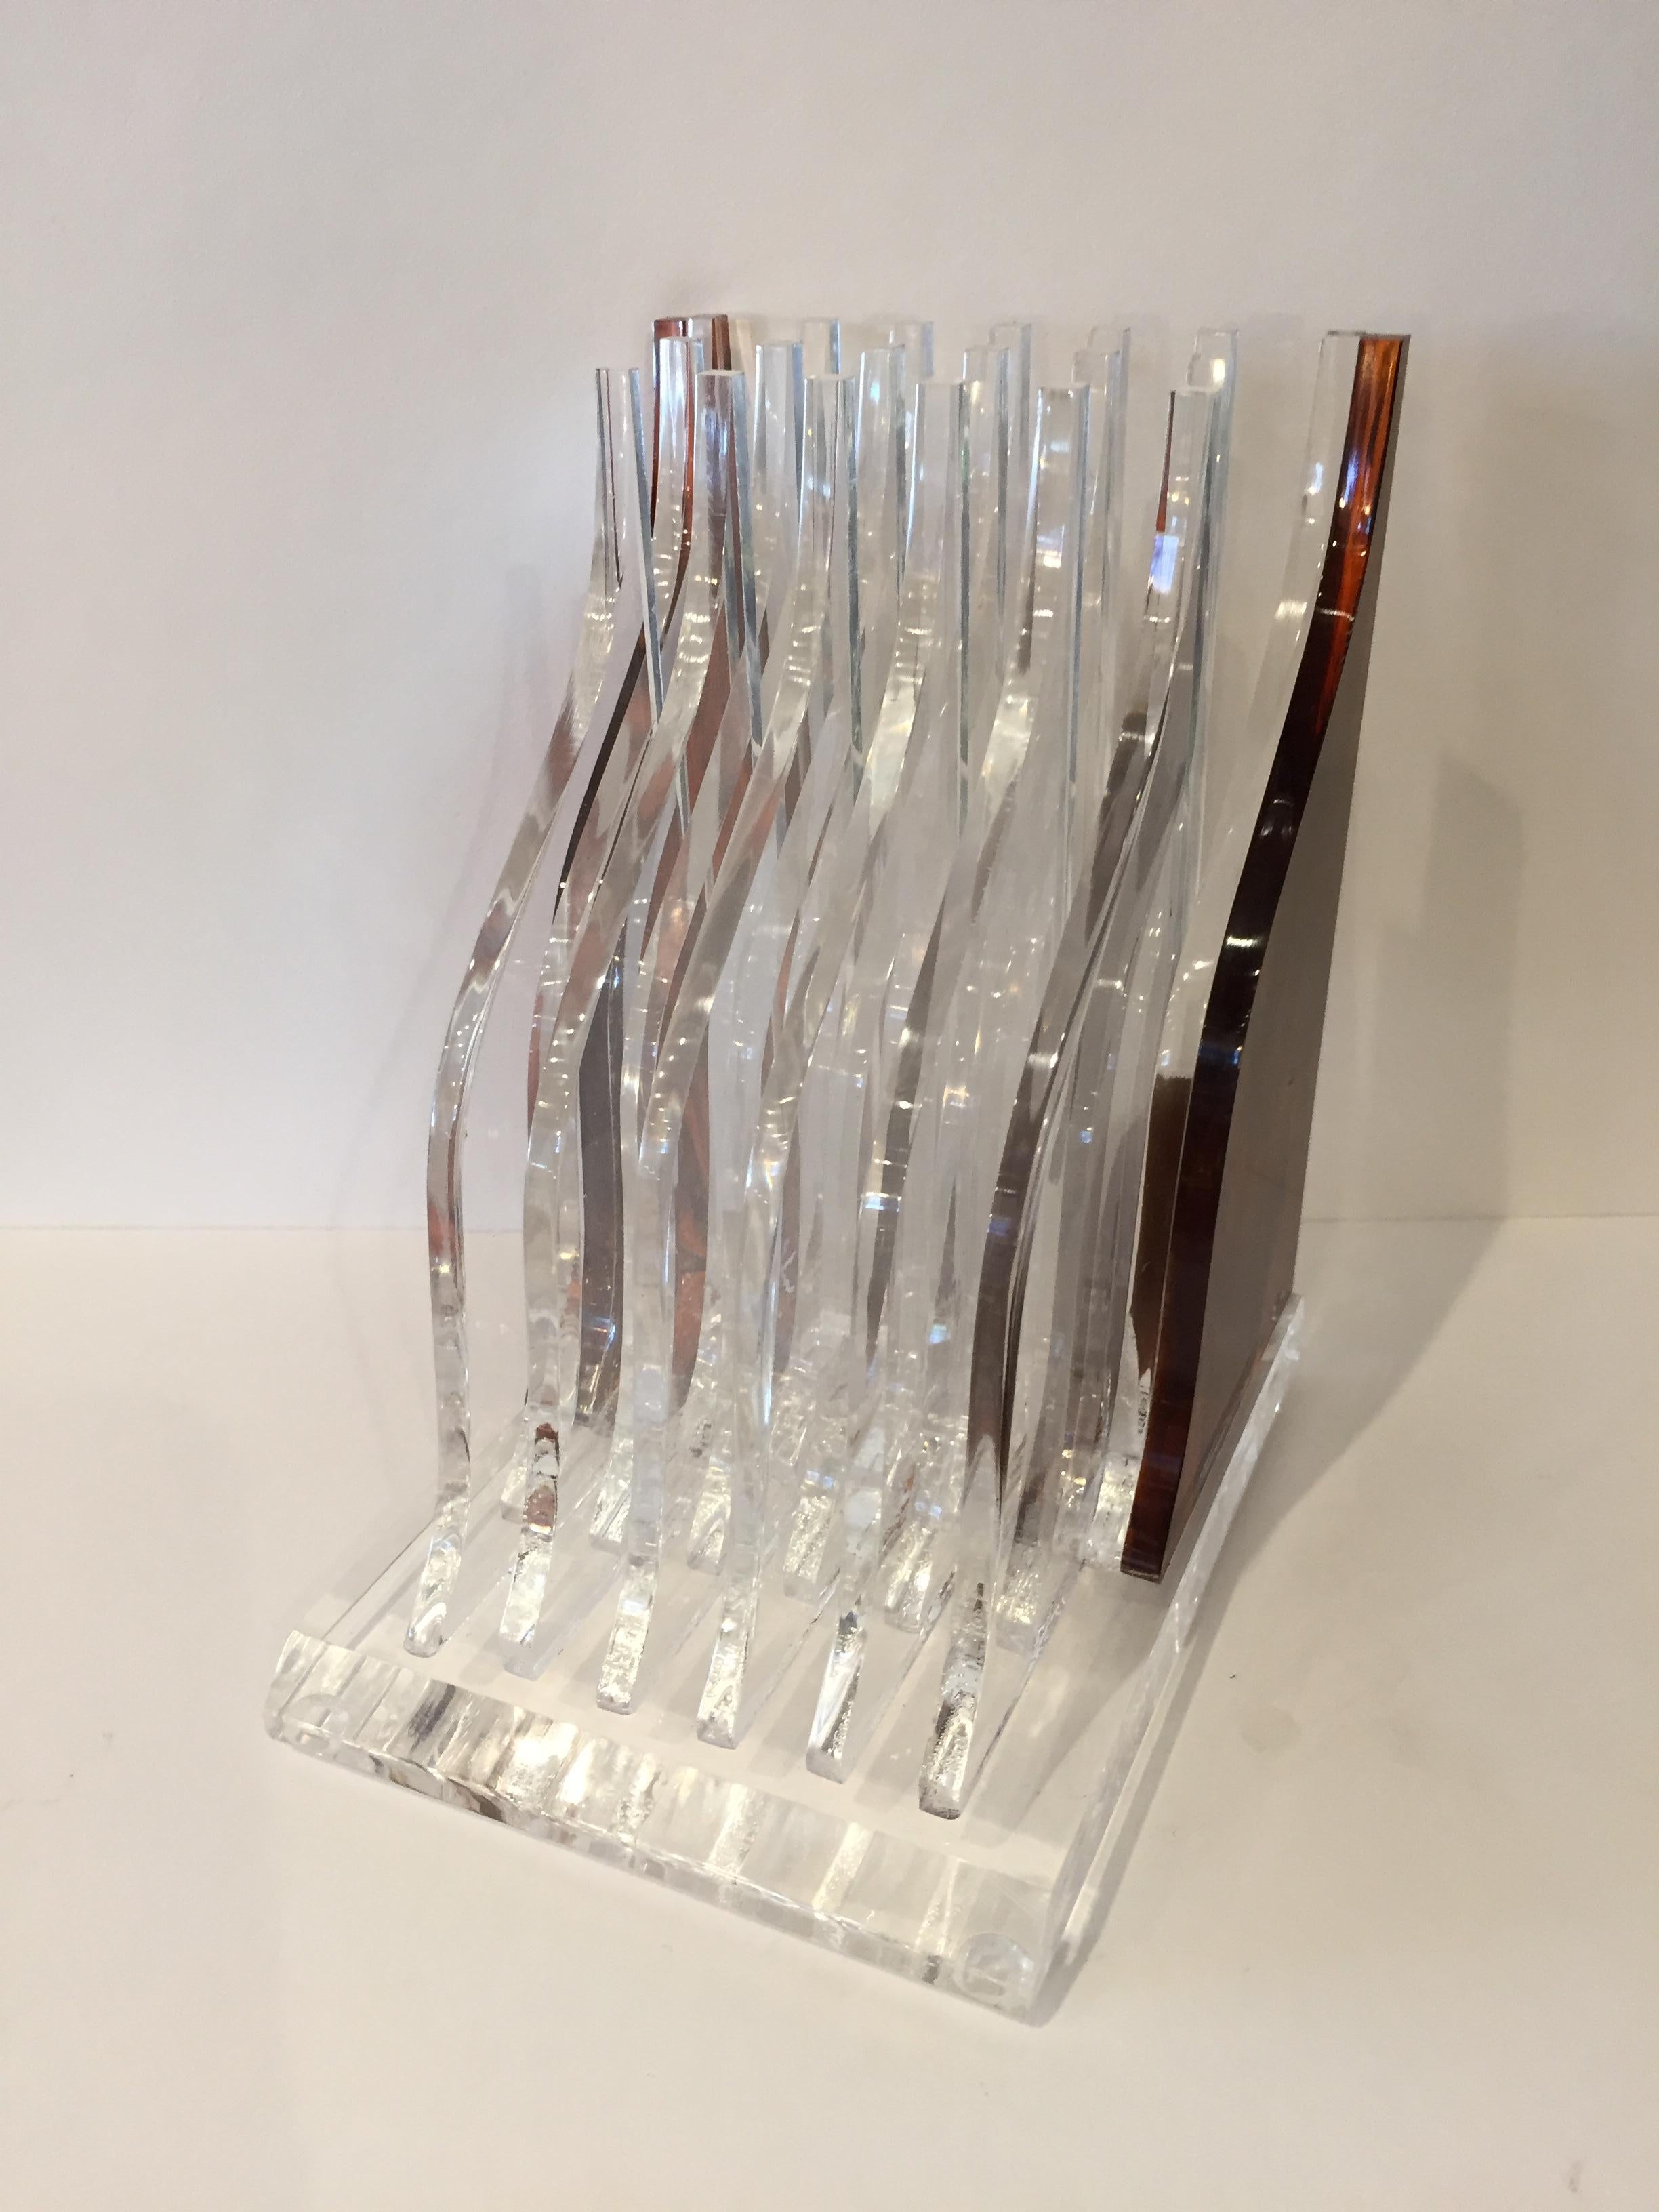 Acrylic Lucite Tortoise Celluloid Streamline Book Ends For Sale